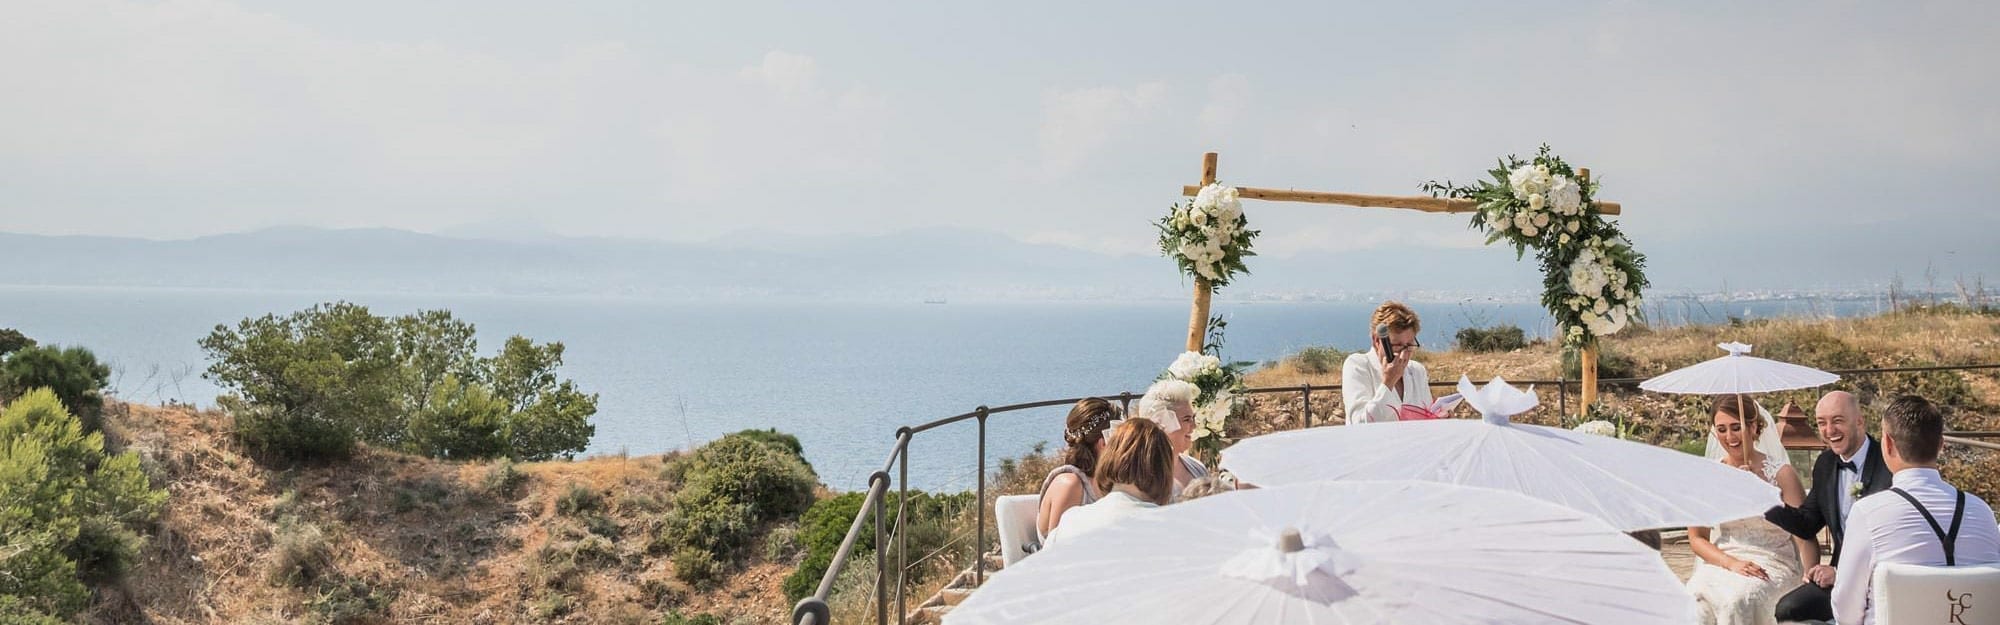 The beautiful rooftop setting for weddings at Cap Rocat